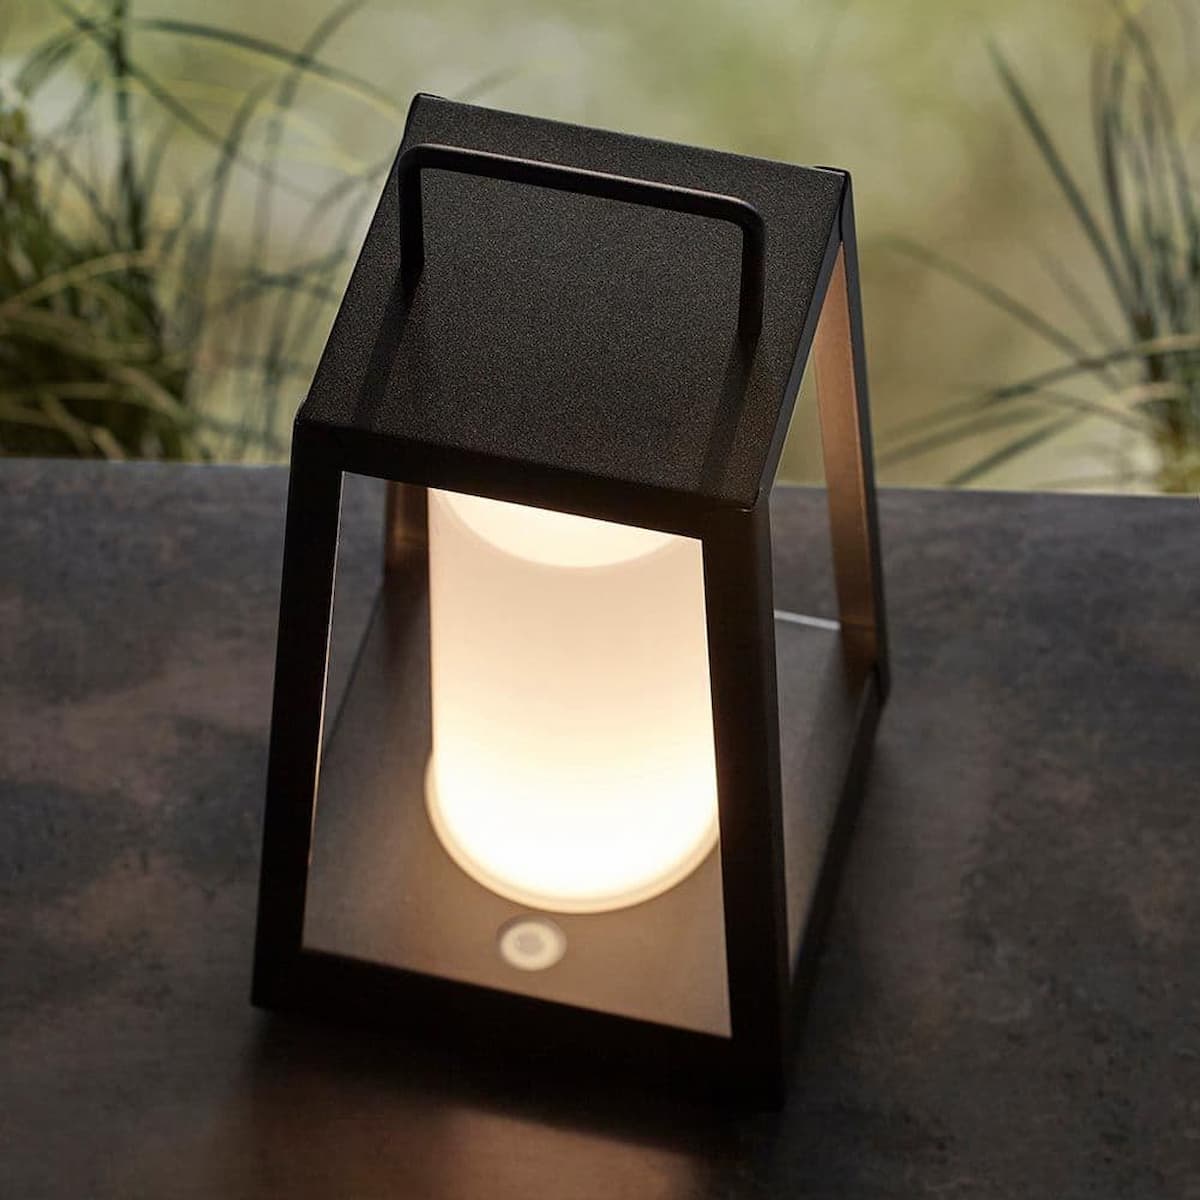 Endon Tallow Chargeable Table lamp-106800